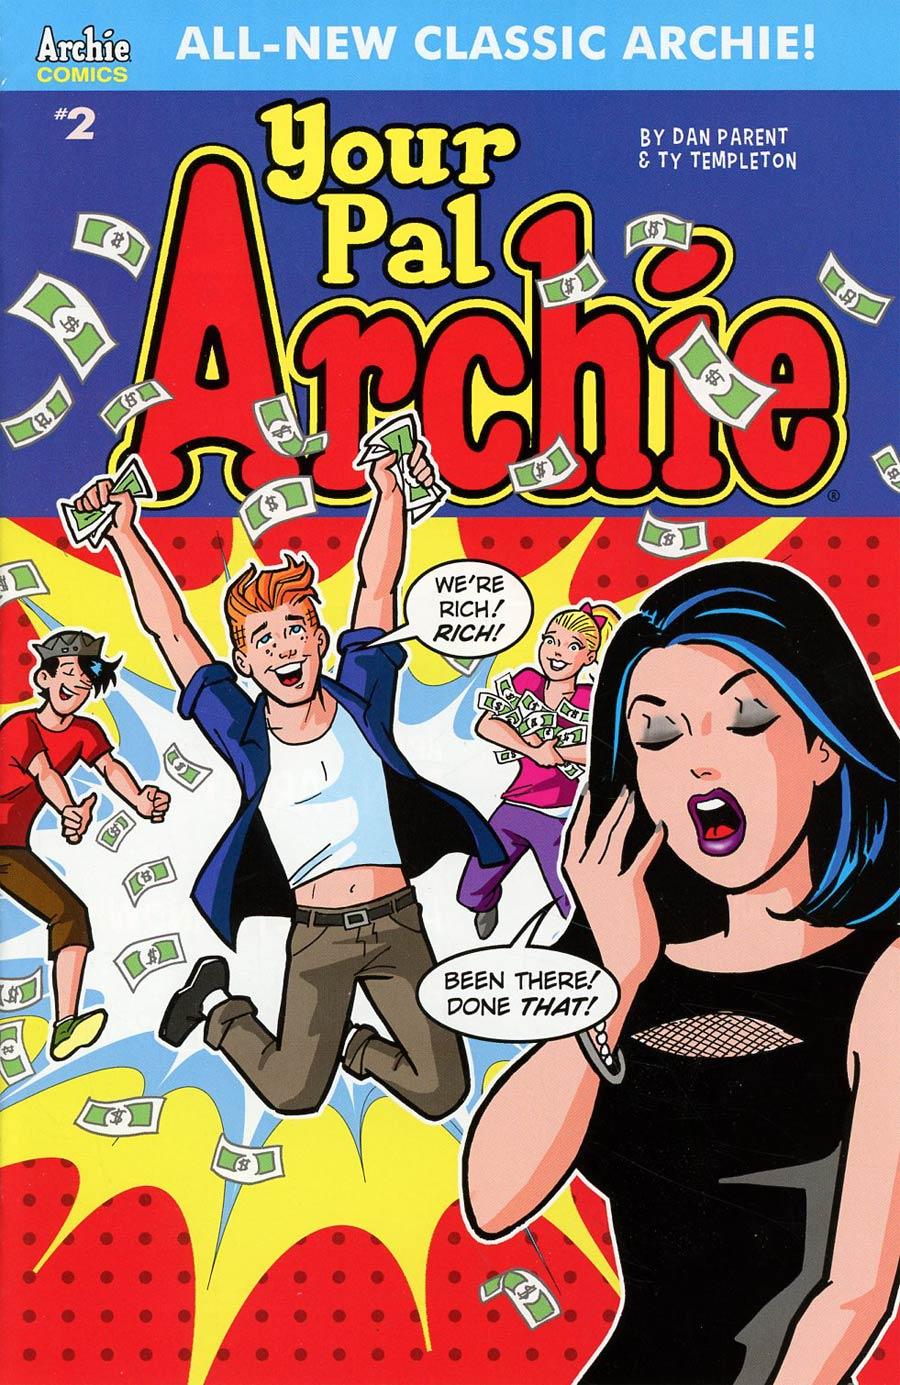 All-New Classic Archie Your Pal Archie Vol. 1 #2